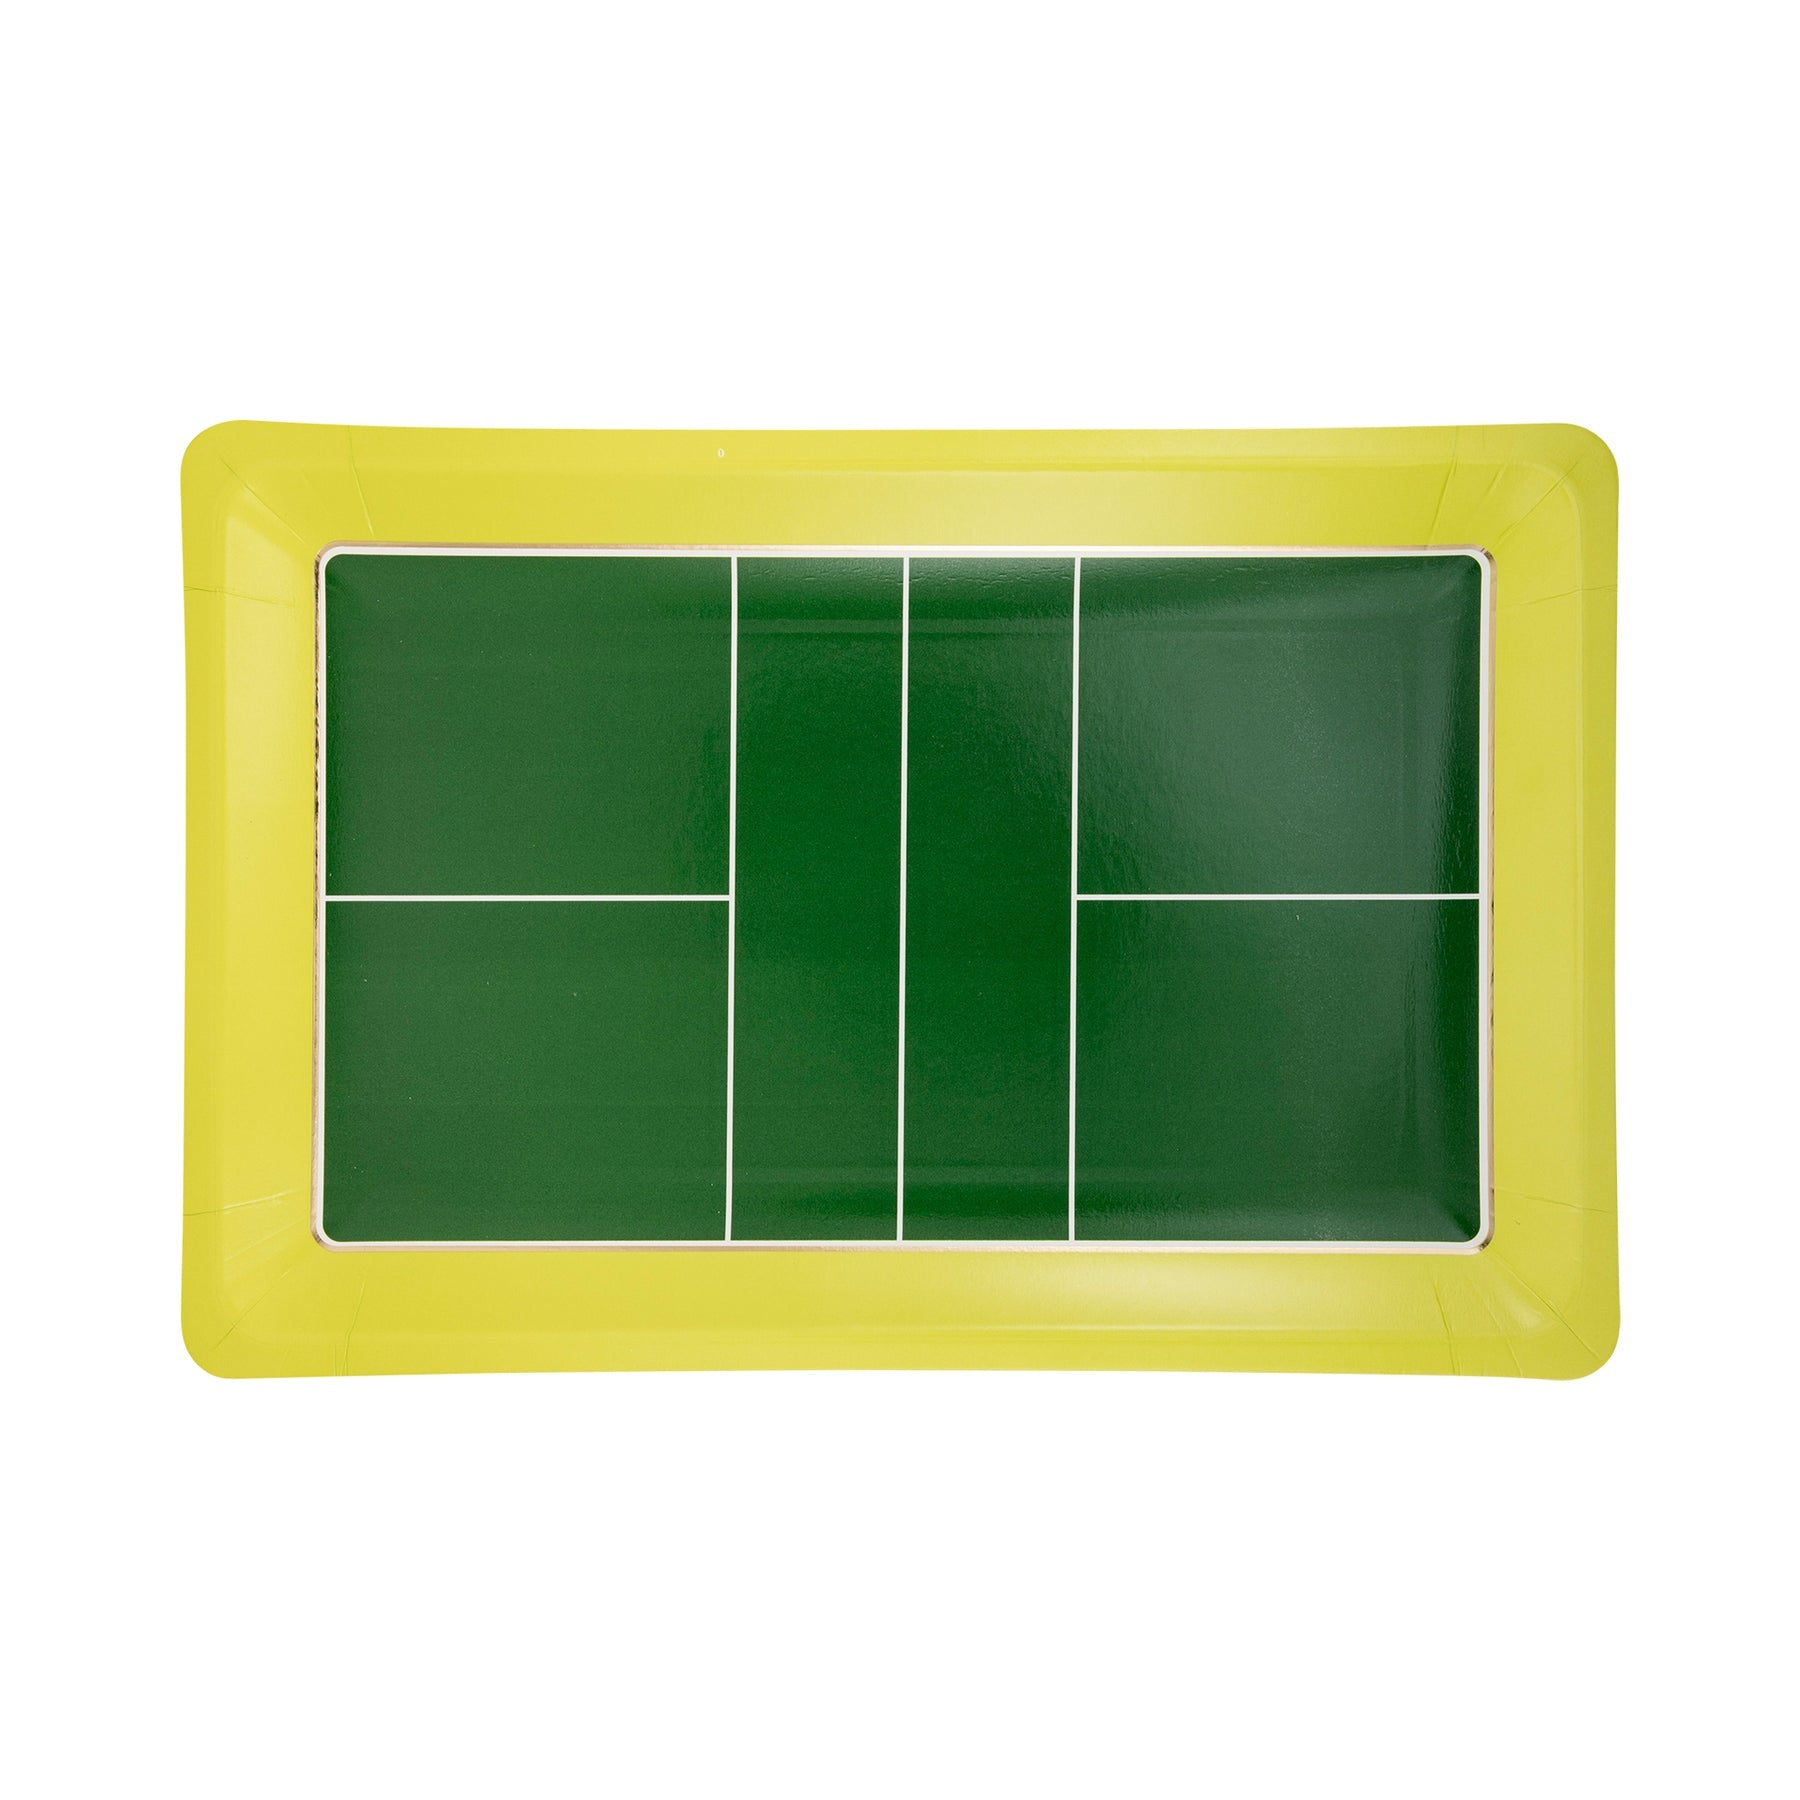 Pickleball Court Shaped Paper Plates